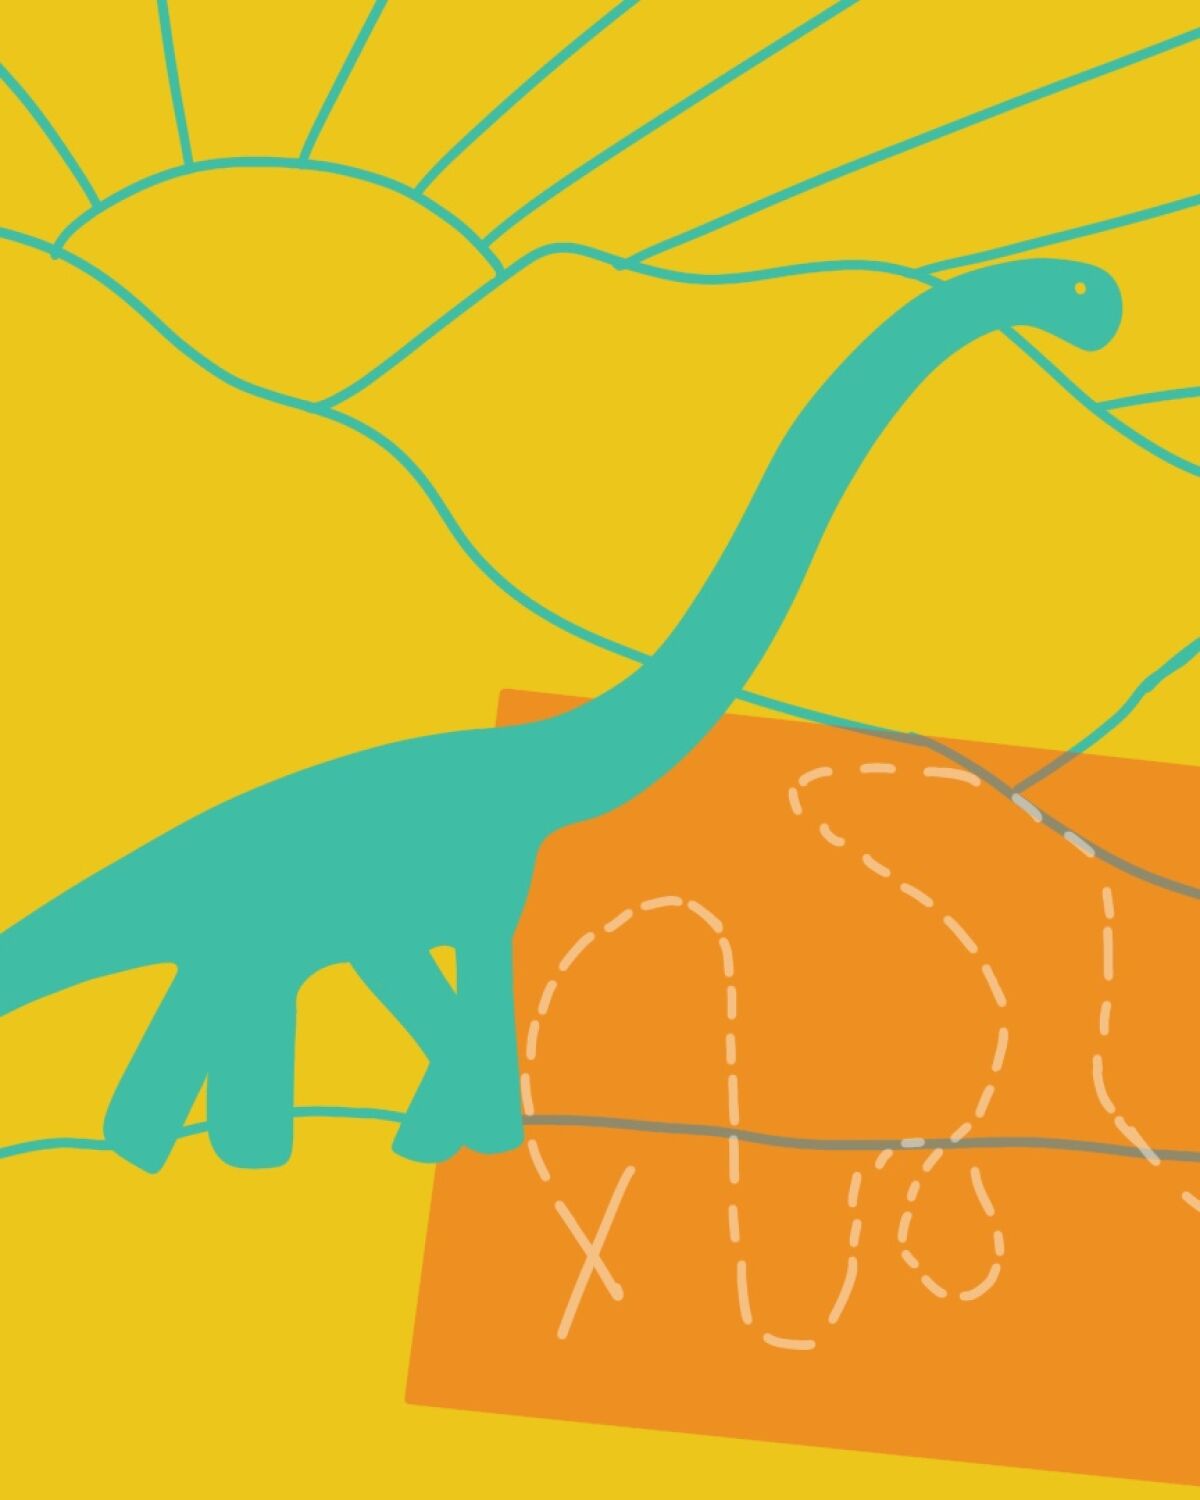 Illustration of dinosaur walking through mountains and sunshine and an illustrated map of Wyoming.